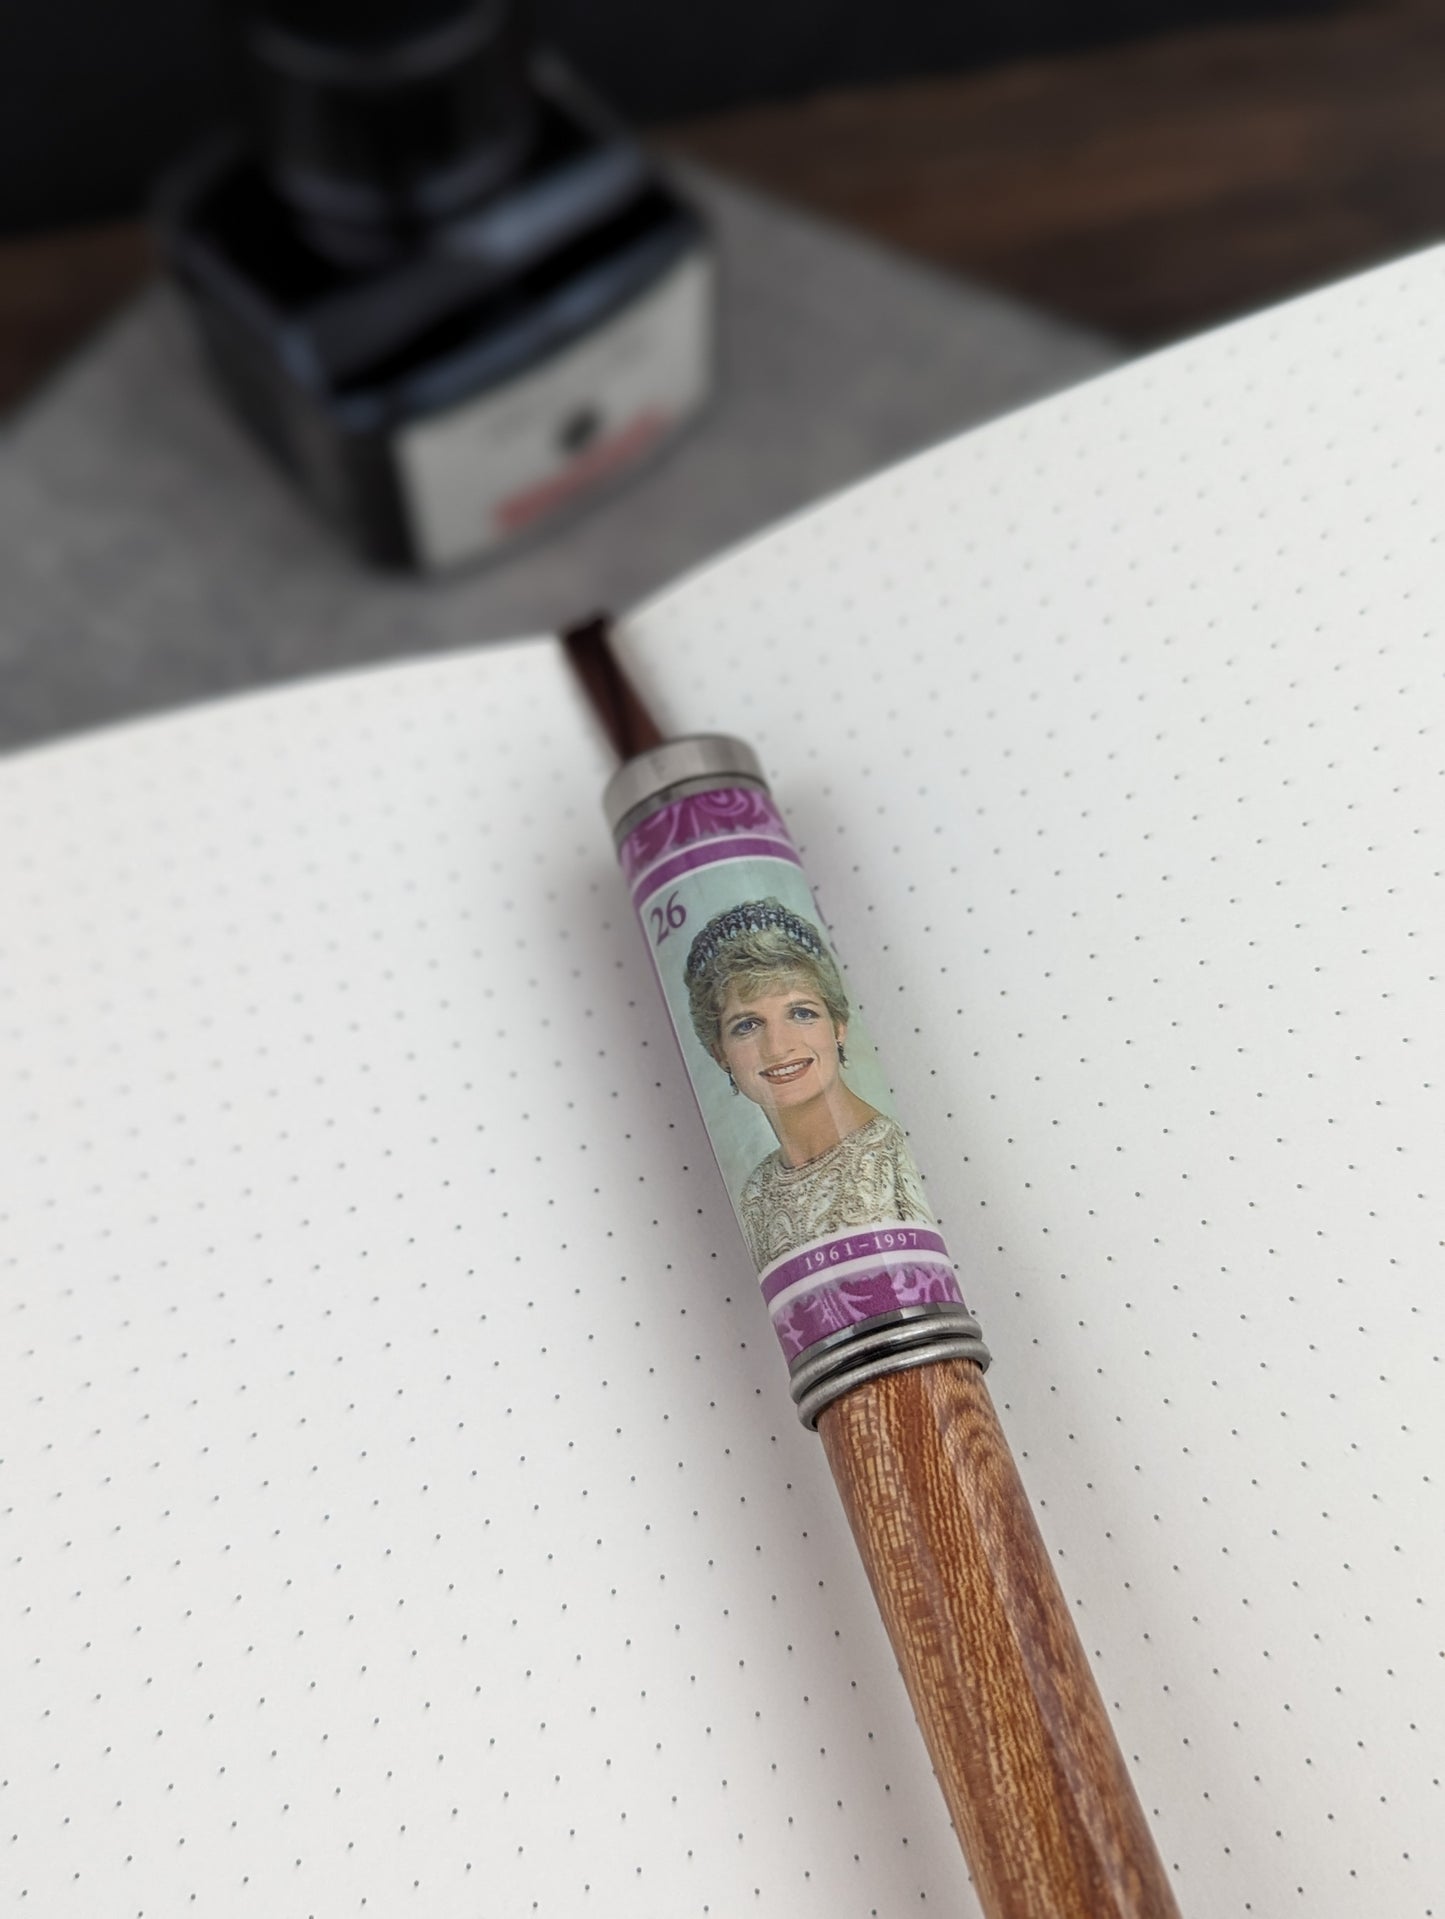 Princess Diana fountain pen with Elm wood from Princess Diana's birth place